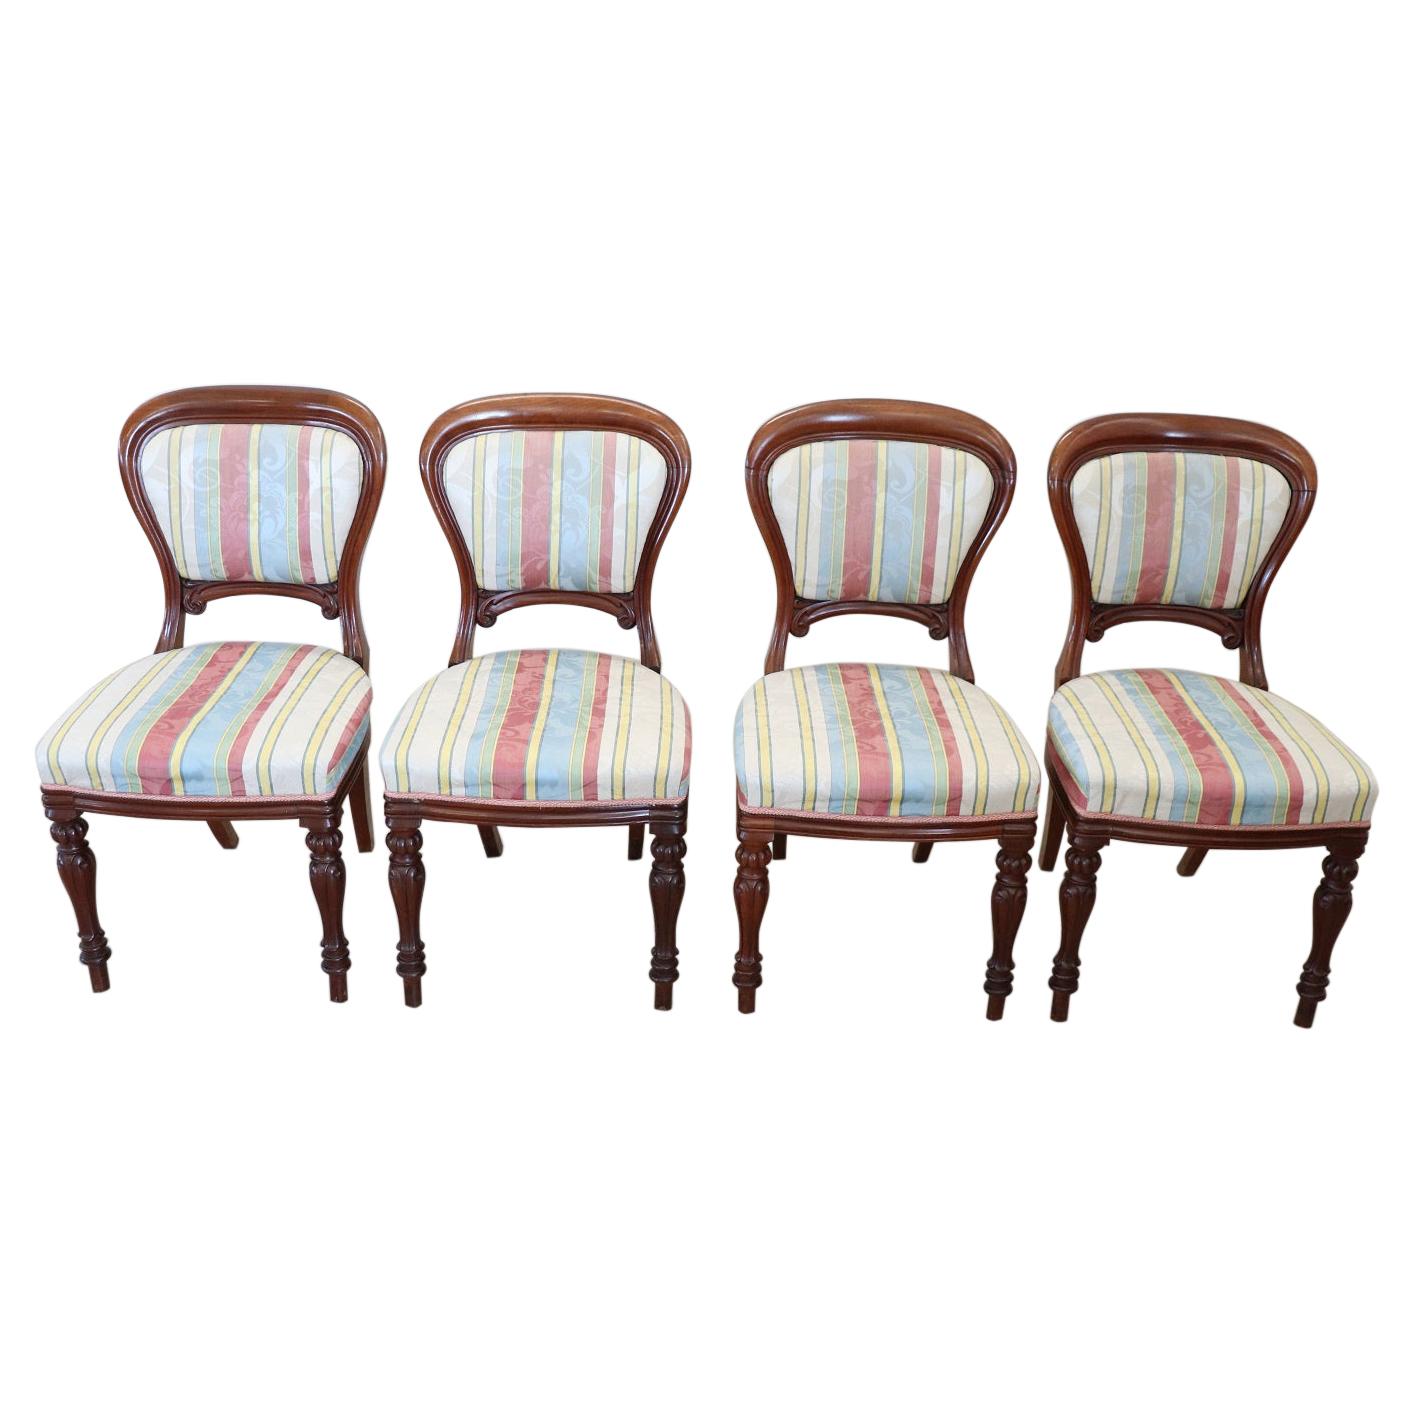 Early 19th Century English Victorian Carved Mahogany Set of Four Antique Chairs